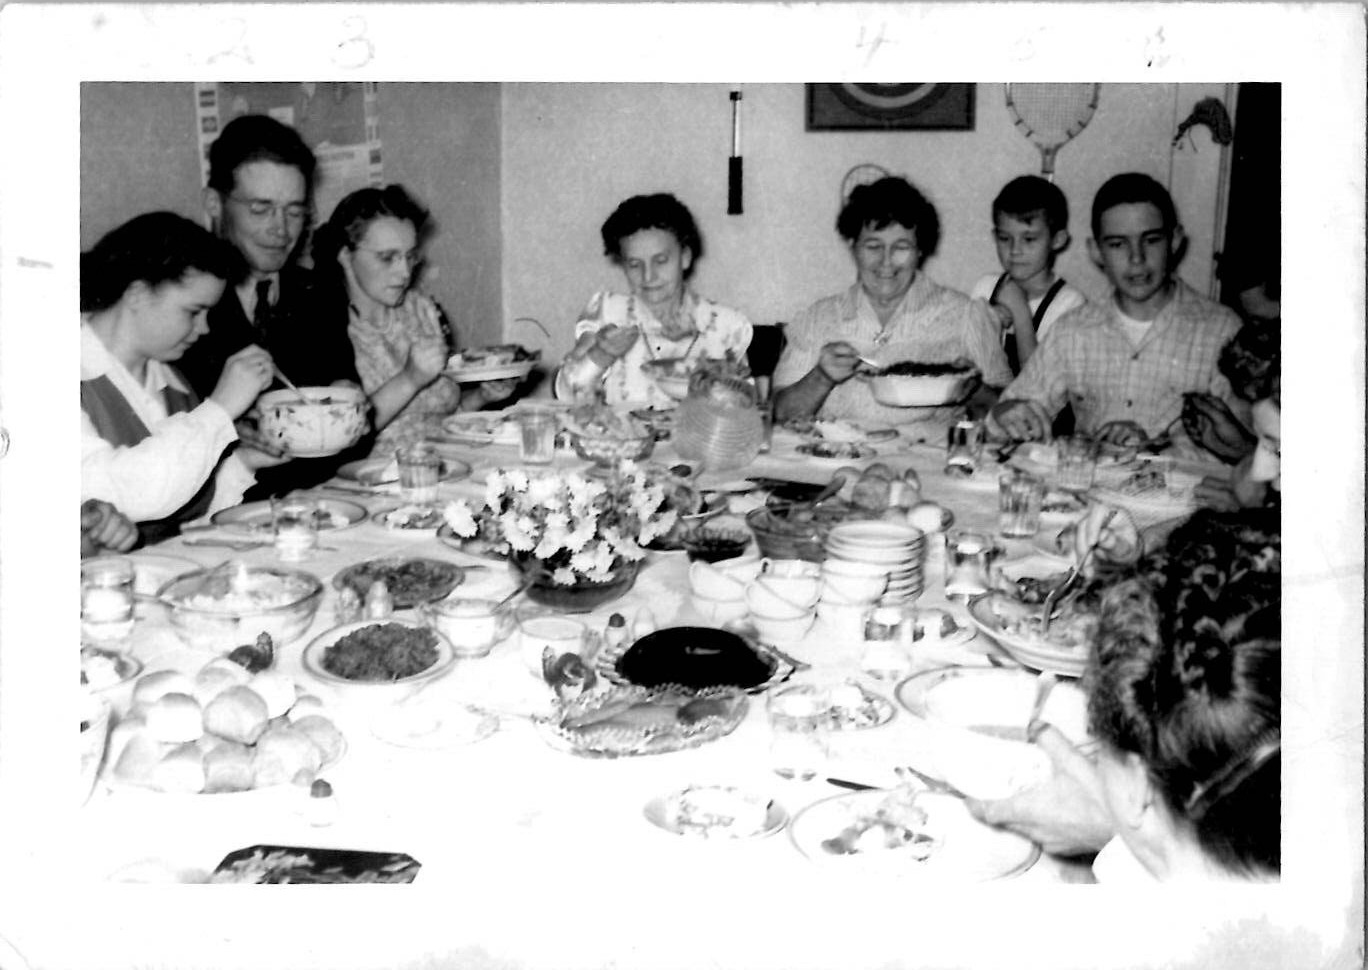 Strongly Unified Italian Family at the Dinner Table 1940s Vintage Photograph